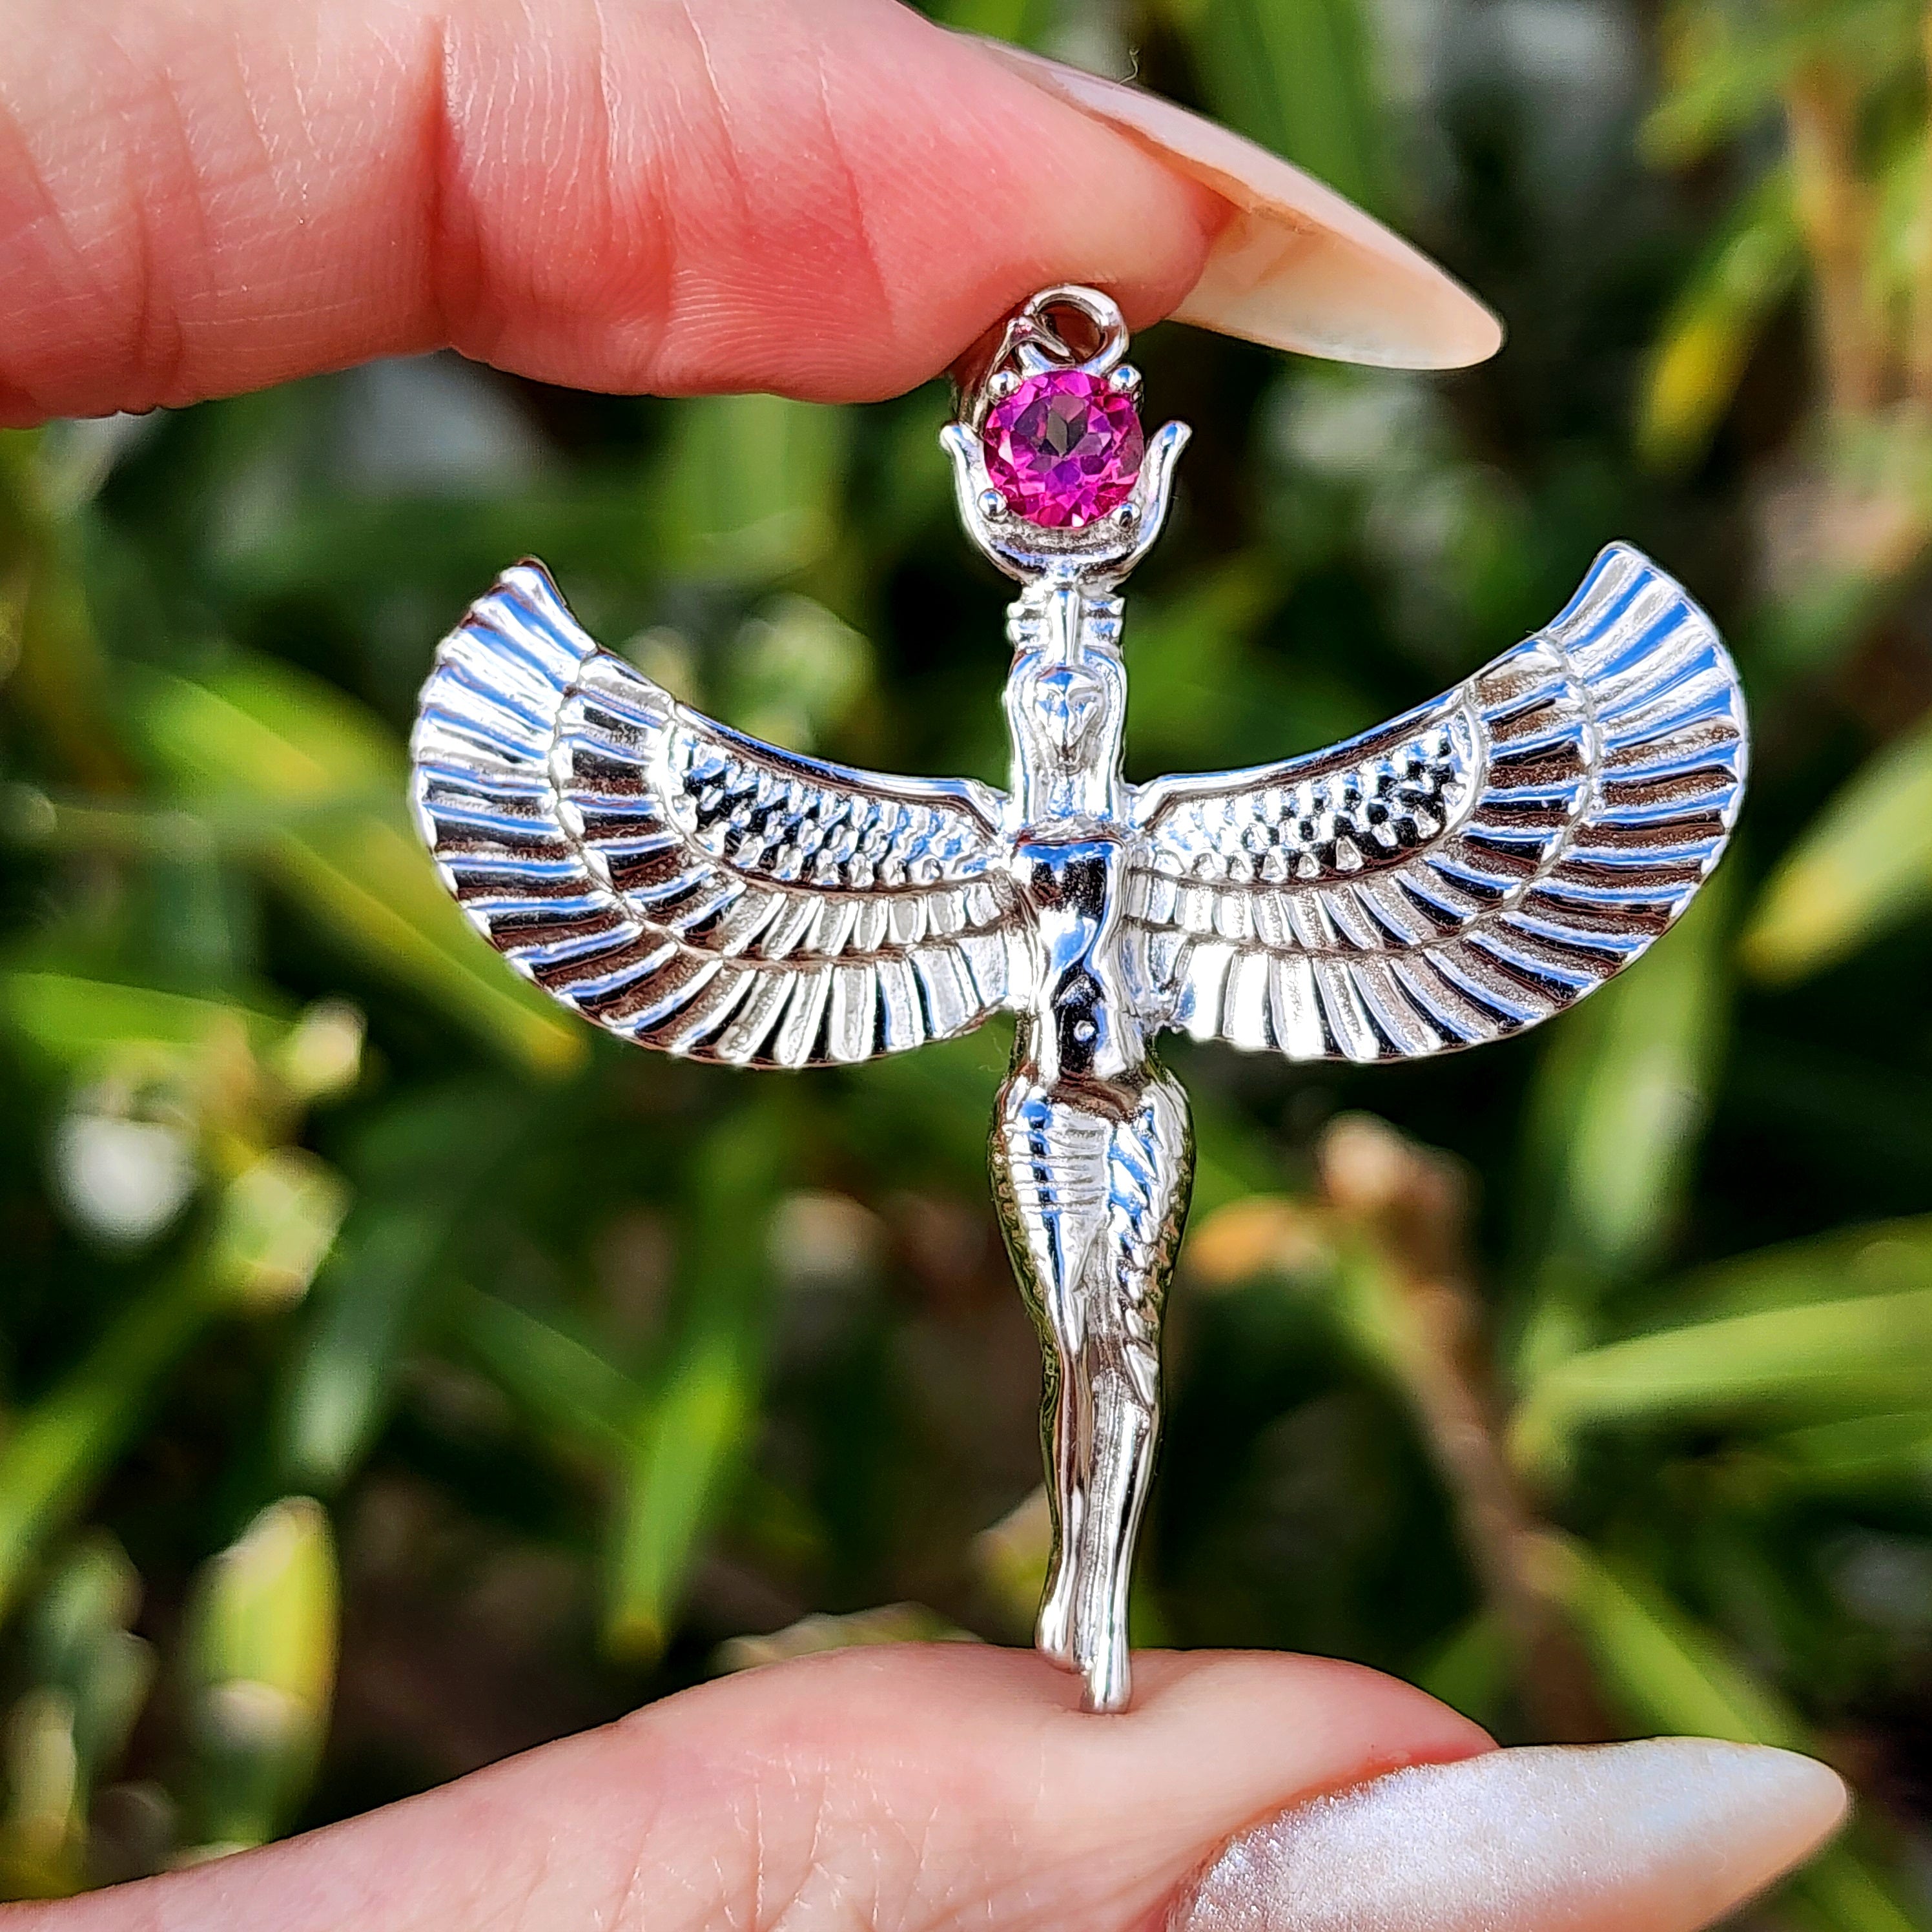 Pink Topaz Isis Goddess Amulet Pendant .925 Silver for Attracting Love, Health, Protection and Power